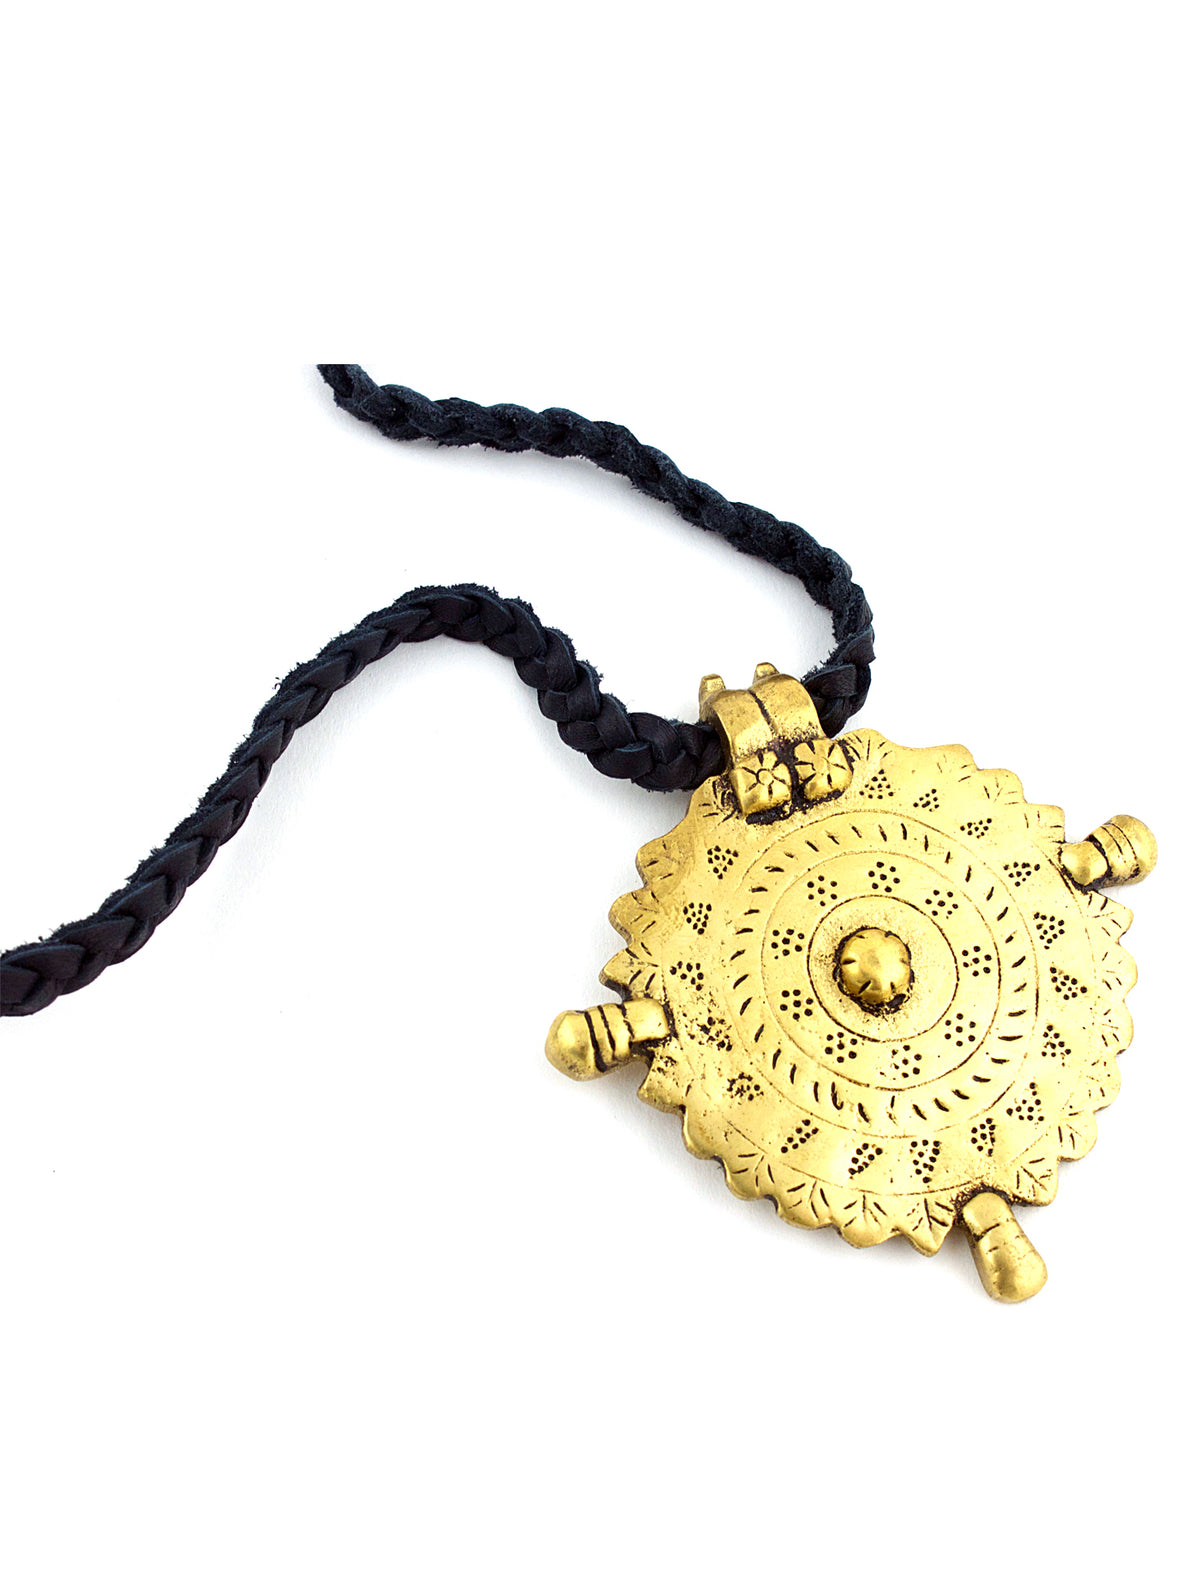 Gold Medallion Braided Black Leather Necklace